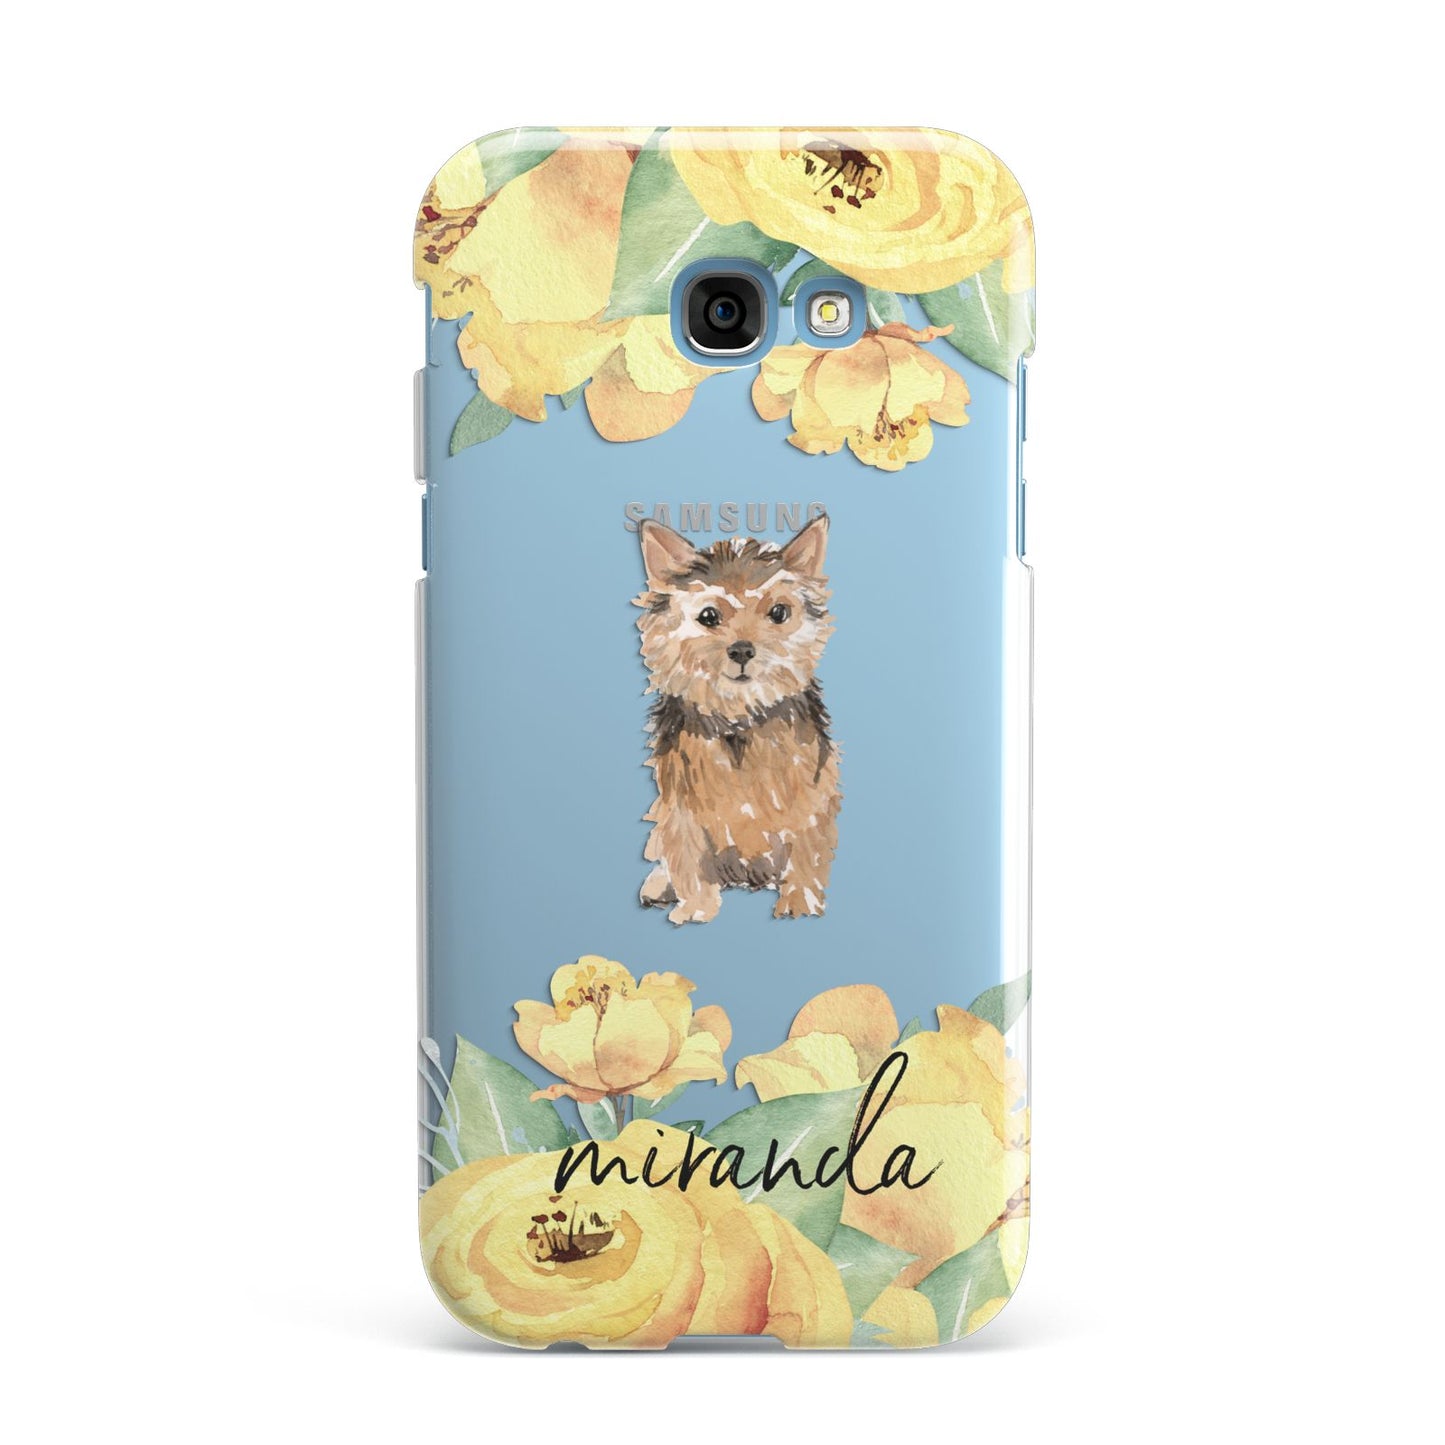 Personalised Norwich Terrier Samsung Galaxy A7 2017 Case